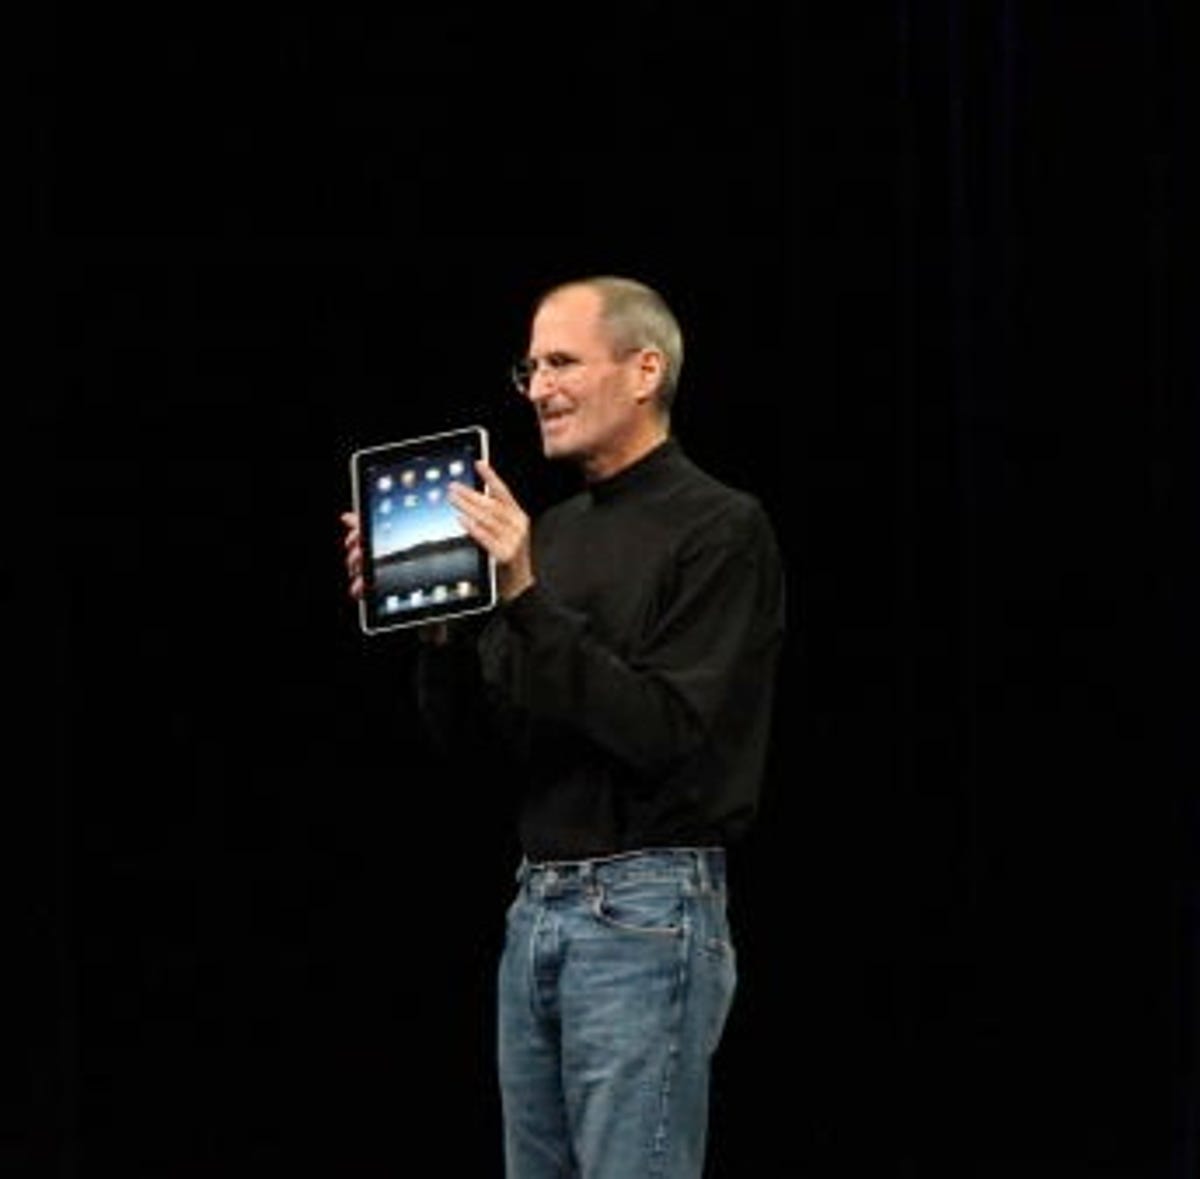 Late Apple CEO Steve Jobs, introducing the first iPad in 2010. The 3G model is among the devices on the ban list.